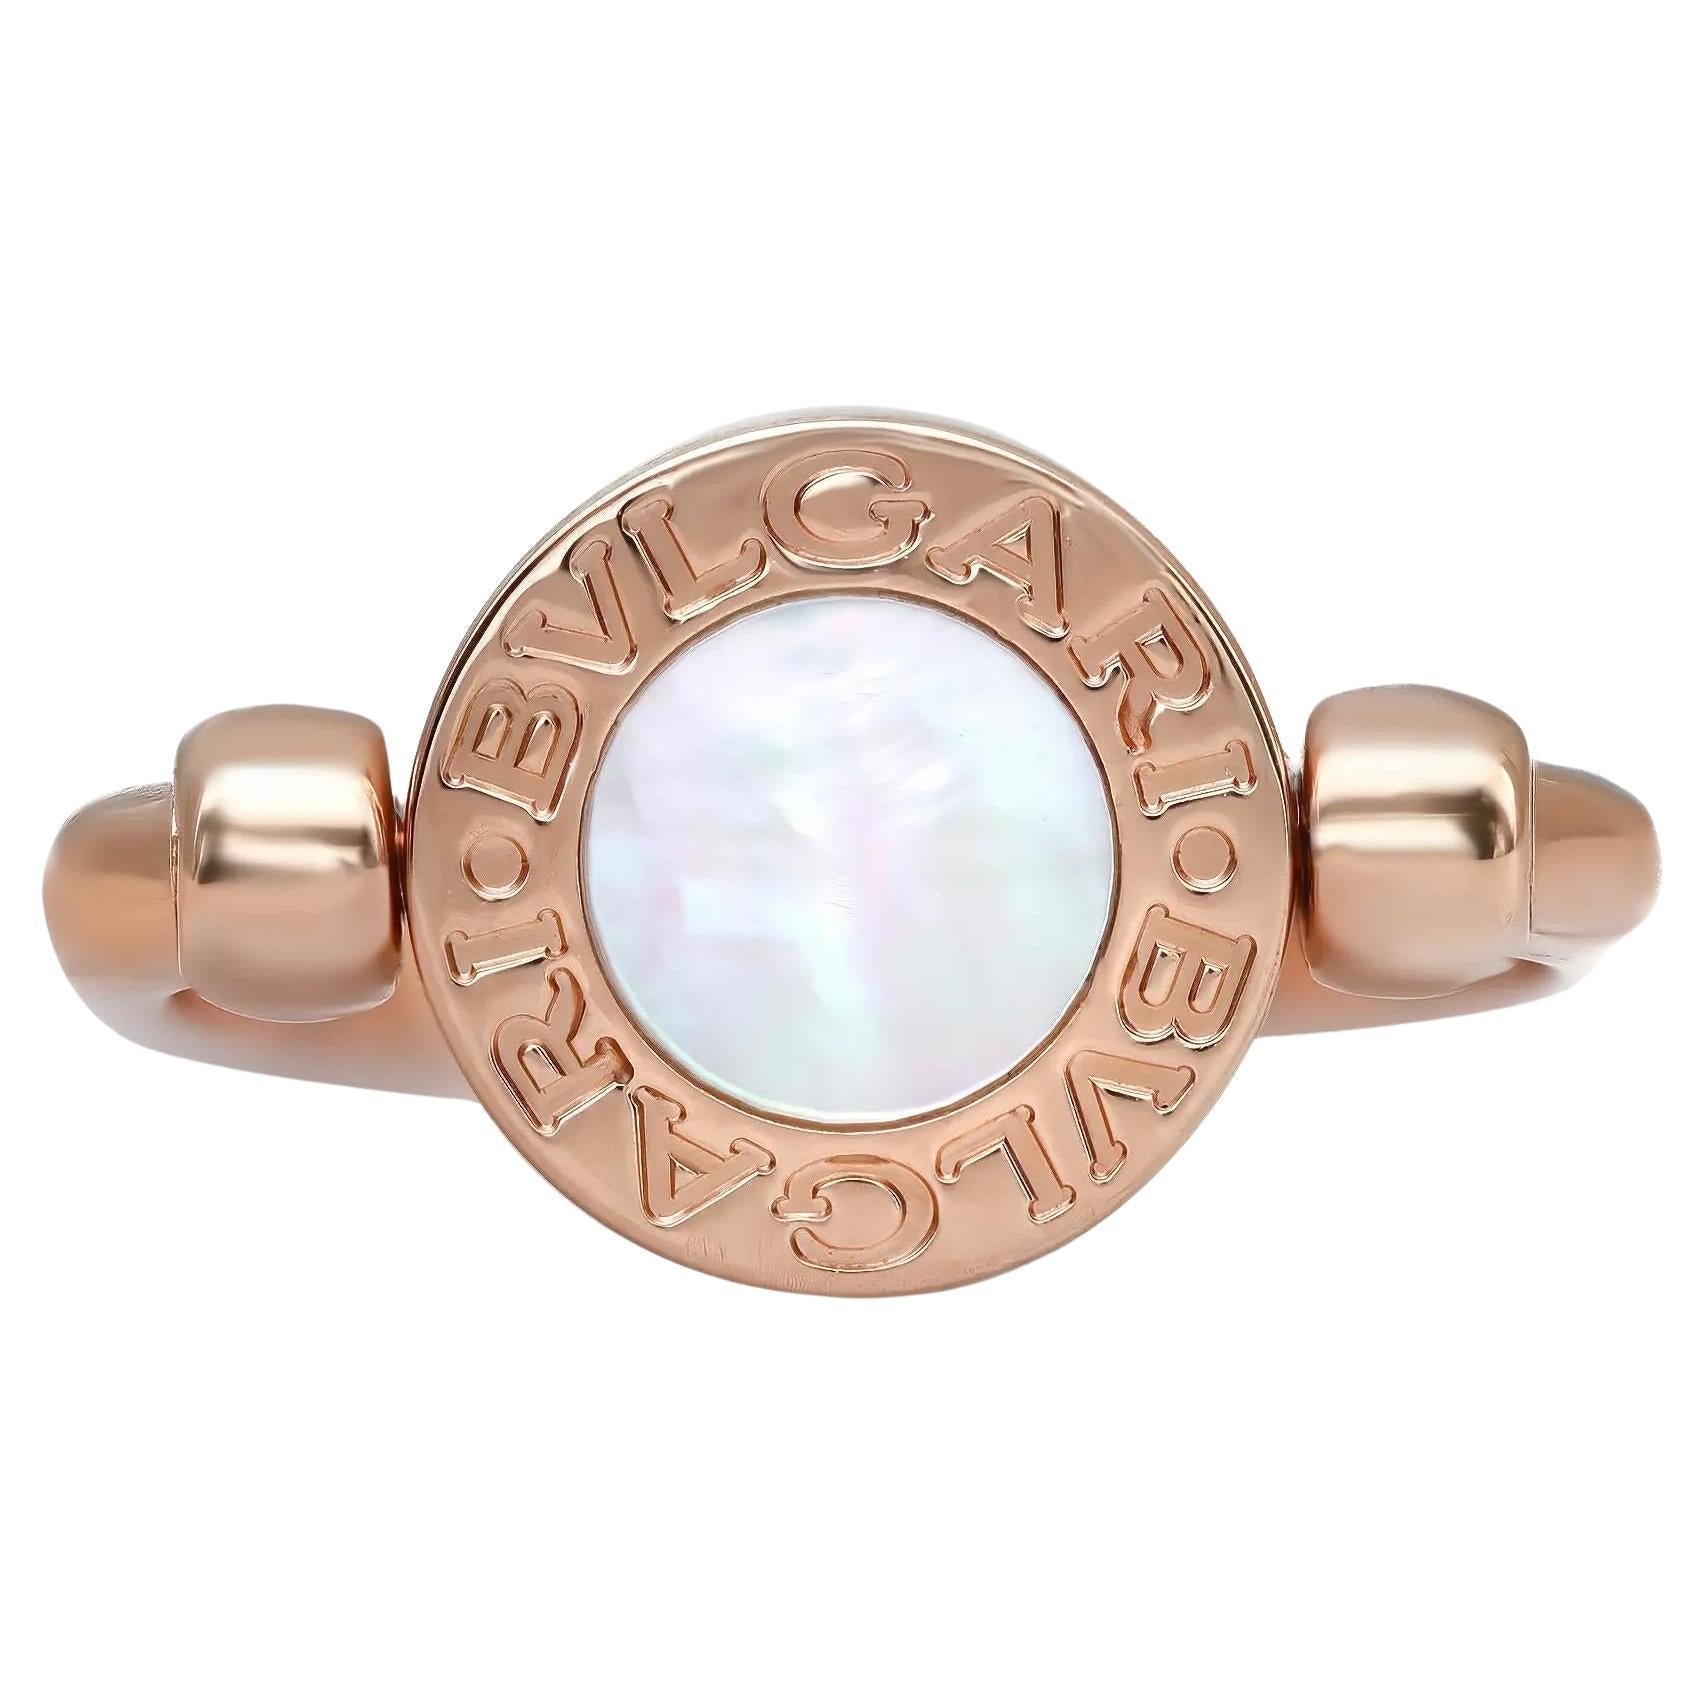 Bvlgari Bvlgari Onyx & Mother Of Pearl Flip Ring 18K Rose Gold Size 53 US 6.5 For Sale